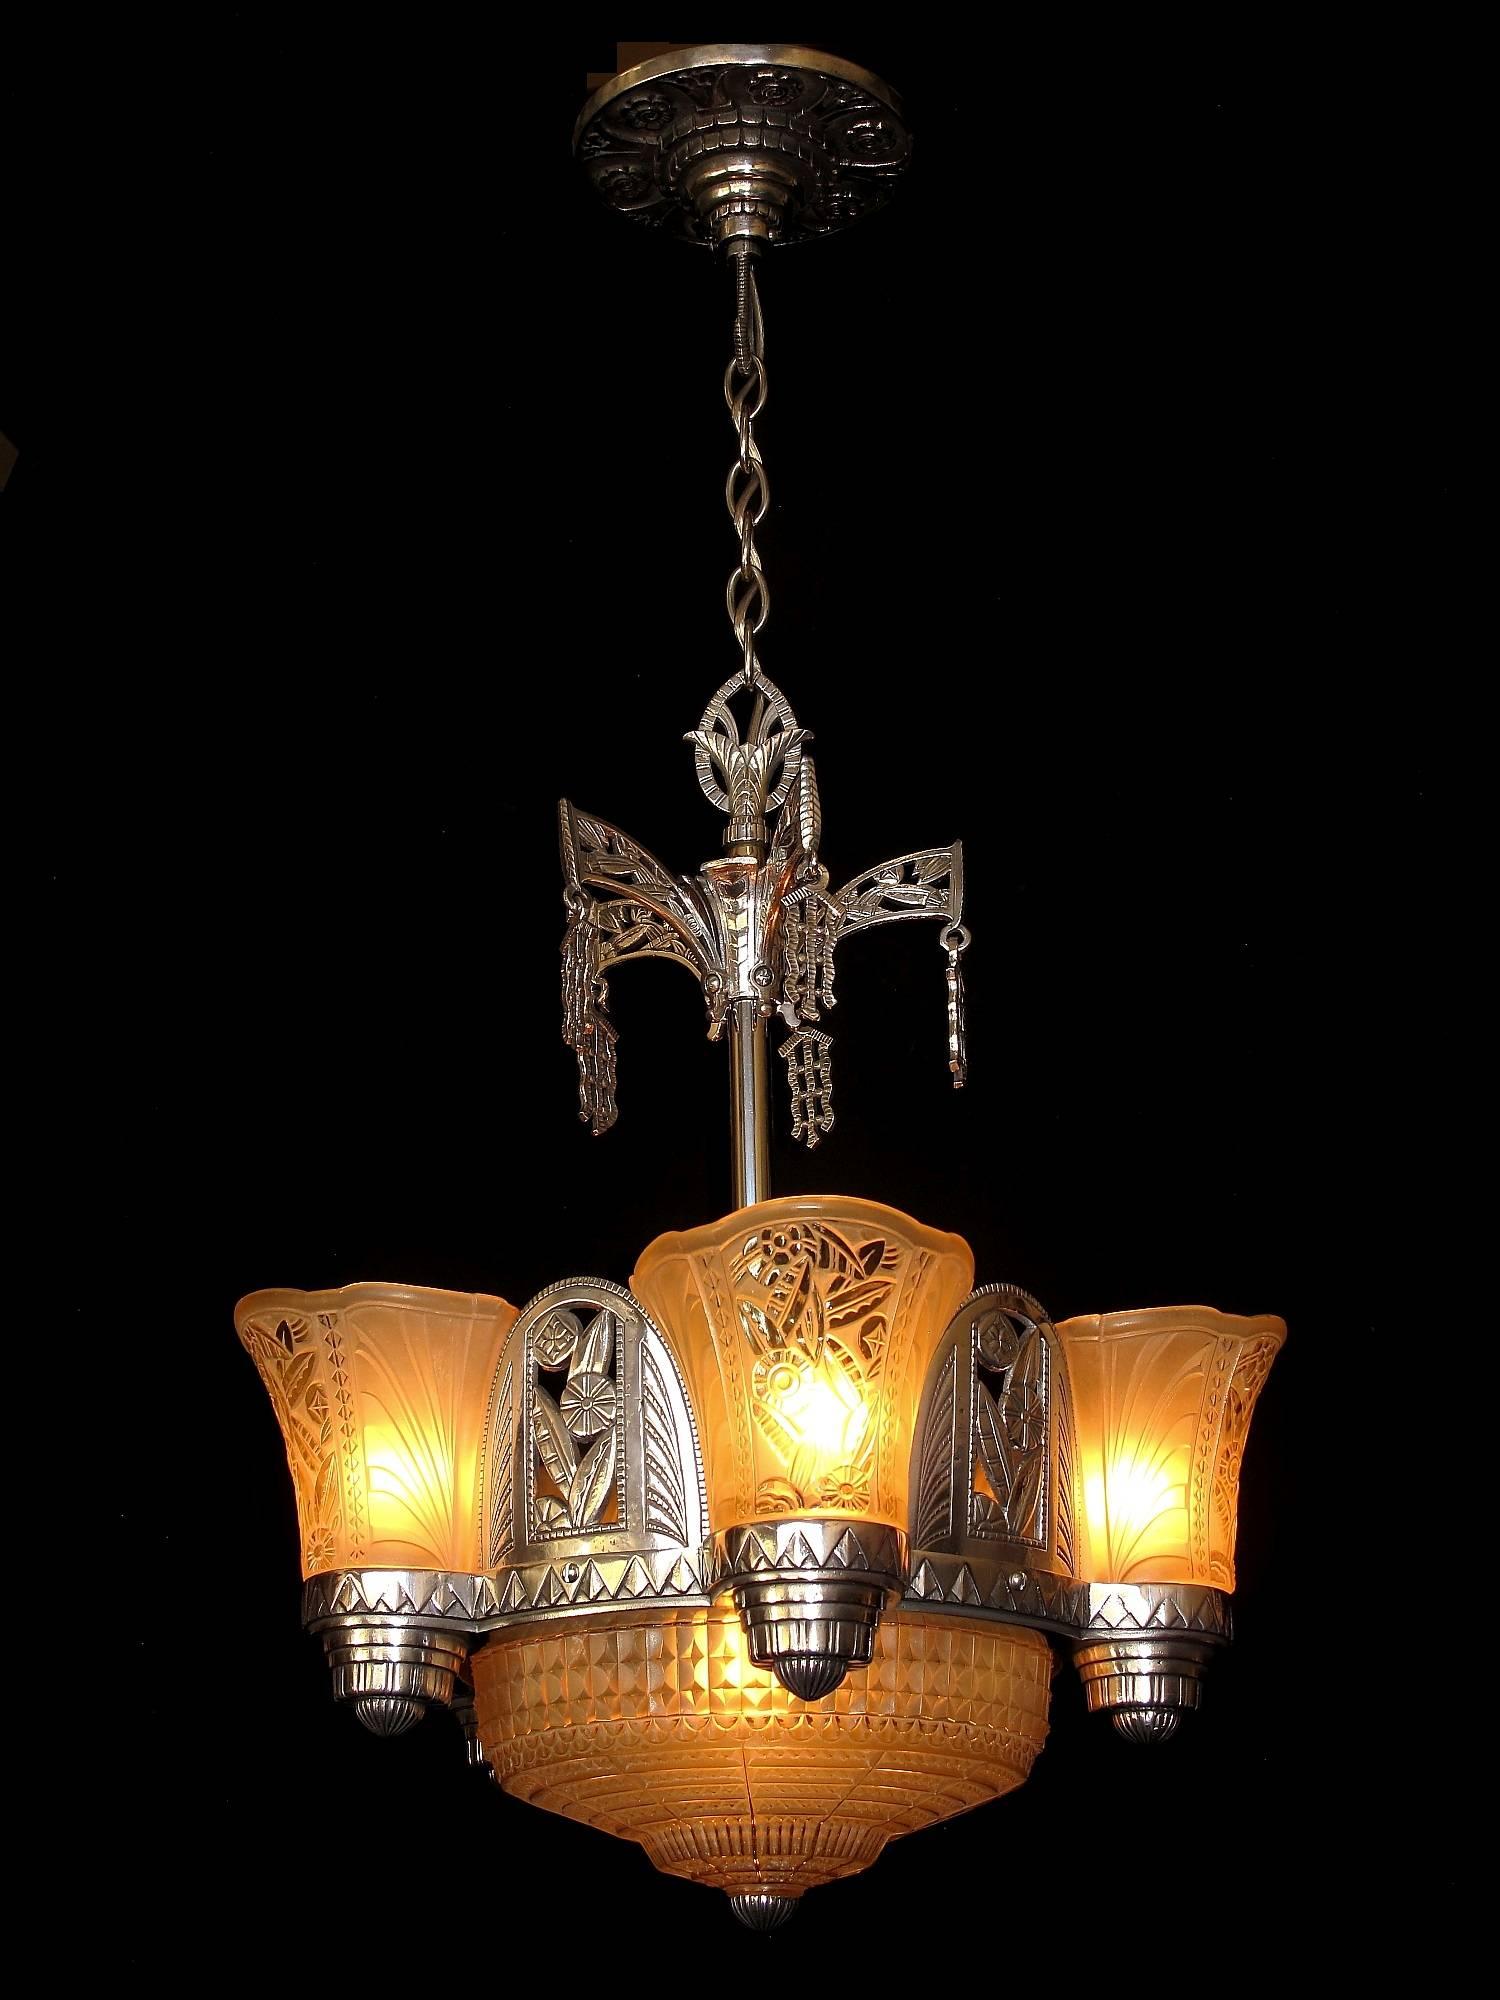 Fabulous example of the powerful artistry design found in Art Deco design in the late 1920s. And rare. In 20 years I can remember only seeing one of these chandeliers complete and this is it. Looks like it could be the home version of a massive